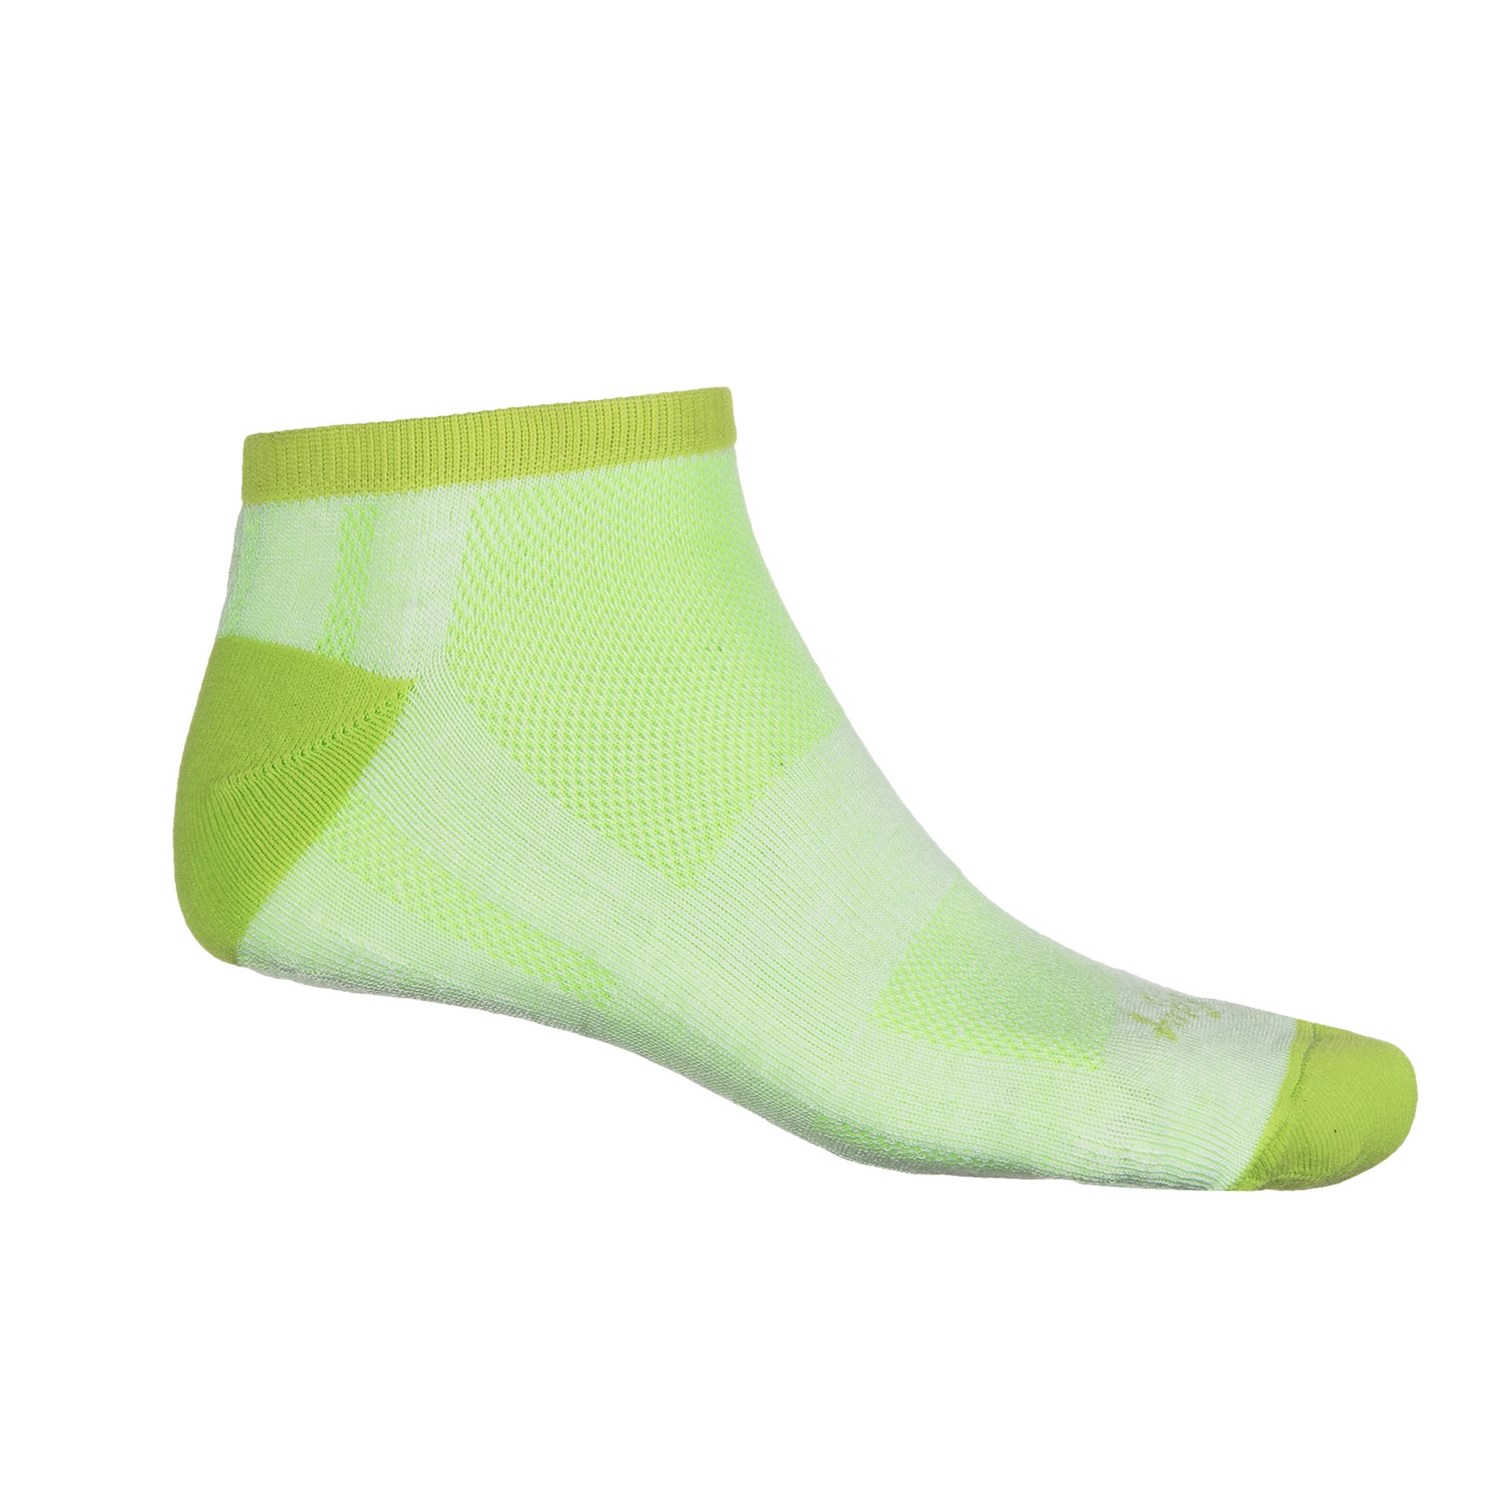 SockGuy Channel Air Socks (For Men and Women) - Save 58%